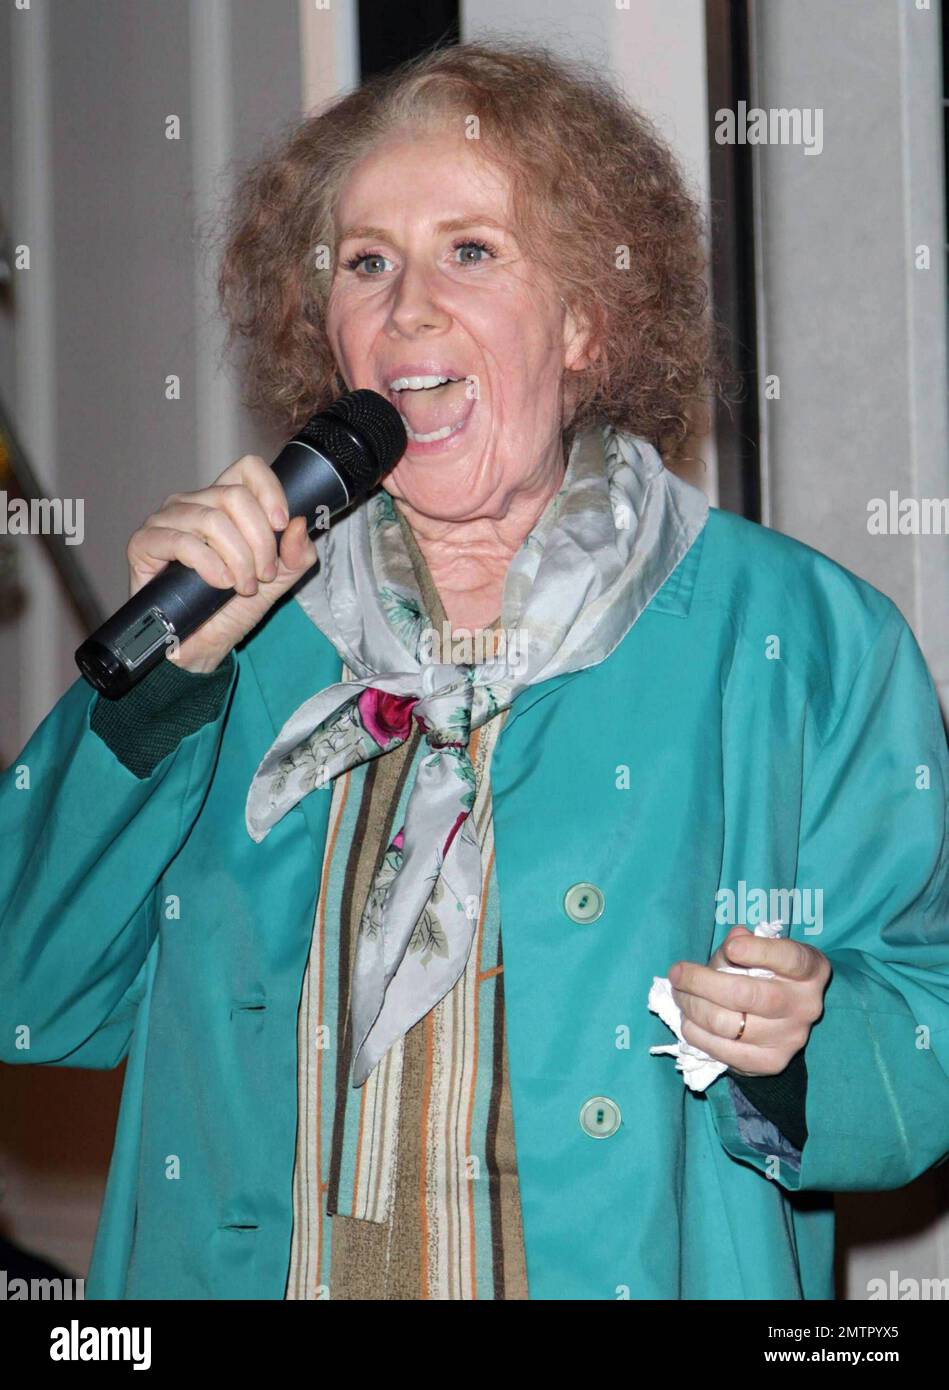 Catherine Tate performs as the character Joannie "Nan" Taylor, who she plays on her comedy program "The Catherine Tate Show," as she lights the Christmas lights at the Stella McCartney store. London, UK. 11/22/10. Stock Photo